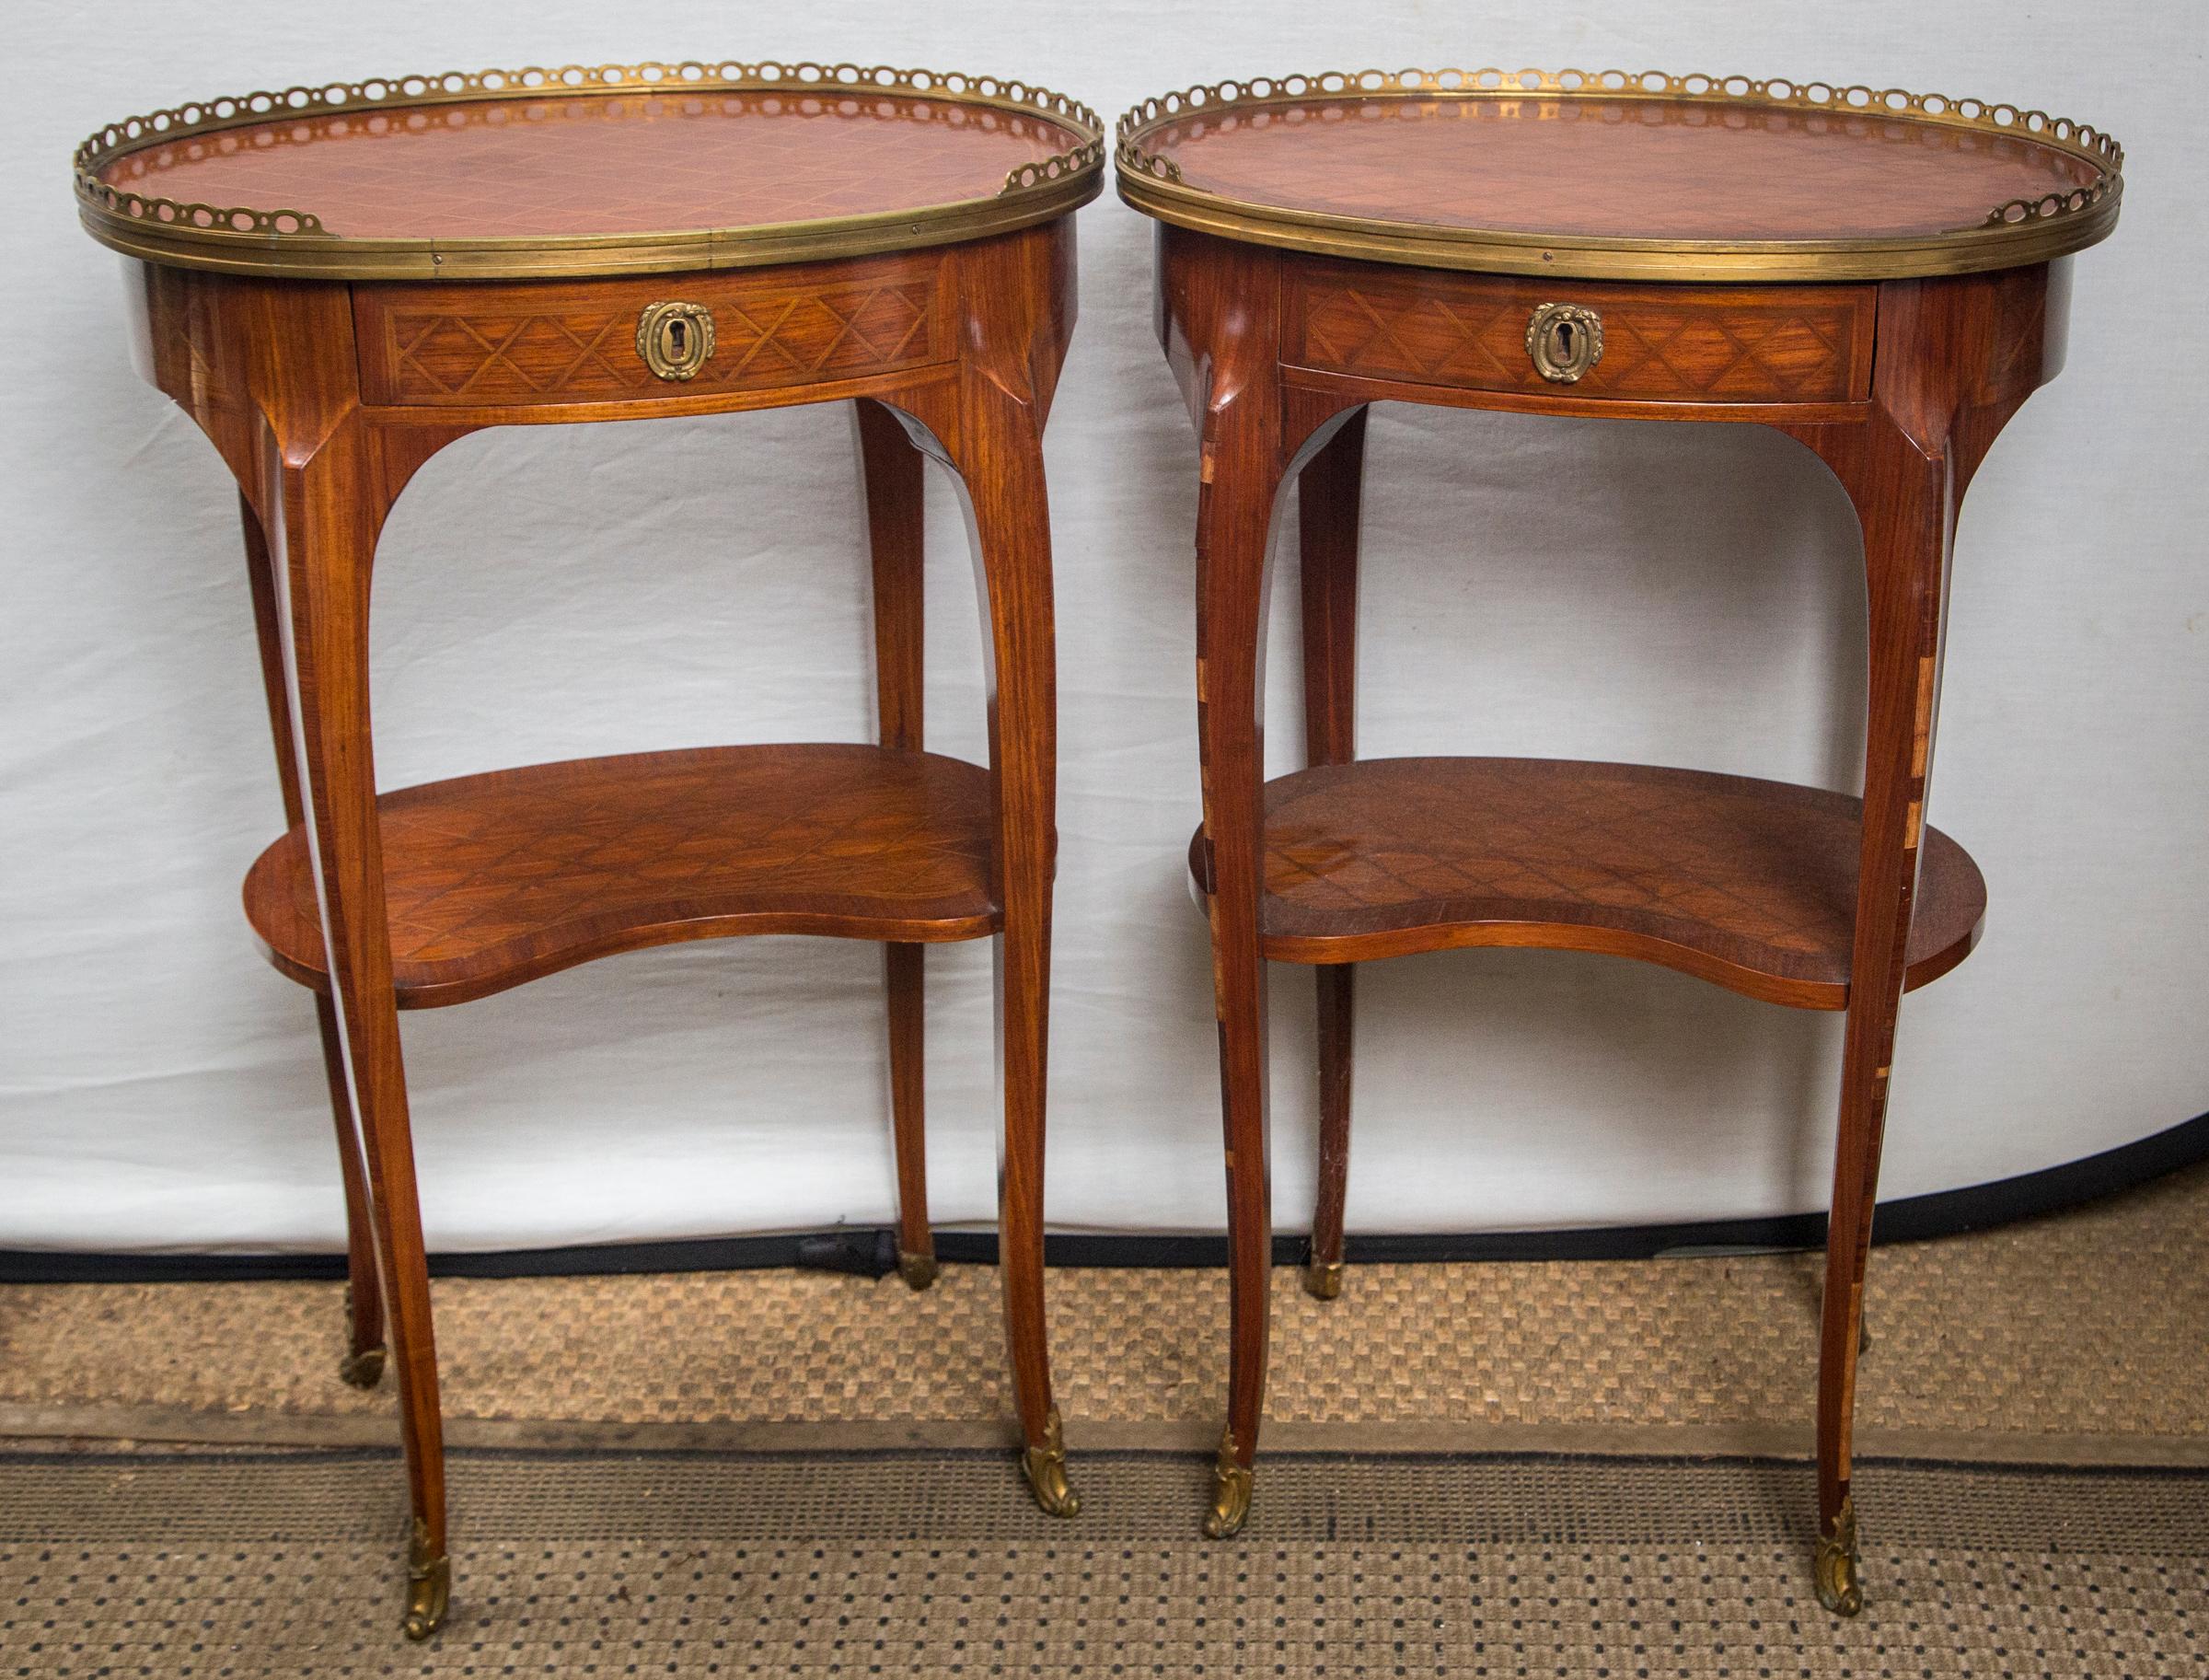 Of oval form with a brass gallery surrounding the cross hatch inlaid tops. One table having slightly lighter inlay of the cross hatching. The lower shelf of kidney shape. Each has a single drawer. Graceful transitional style legs, ending in brass